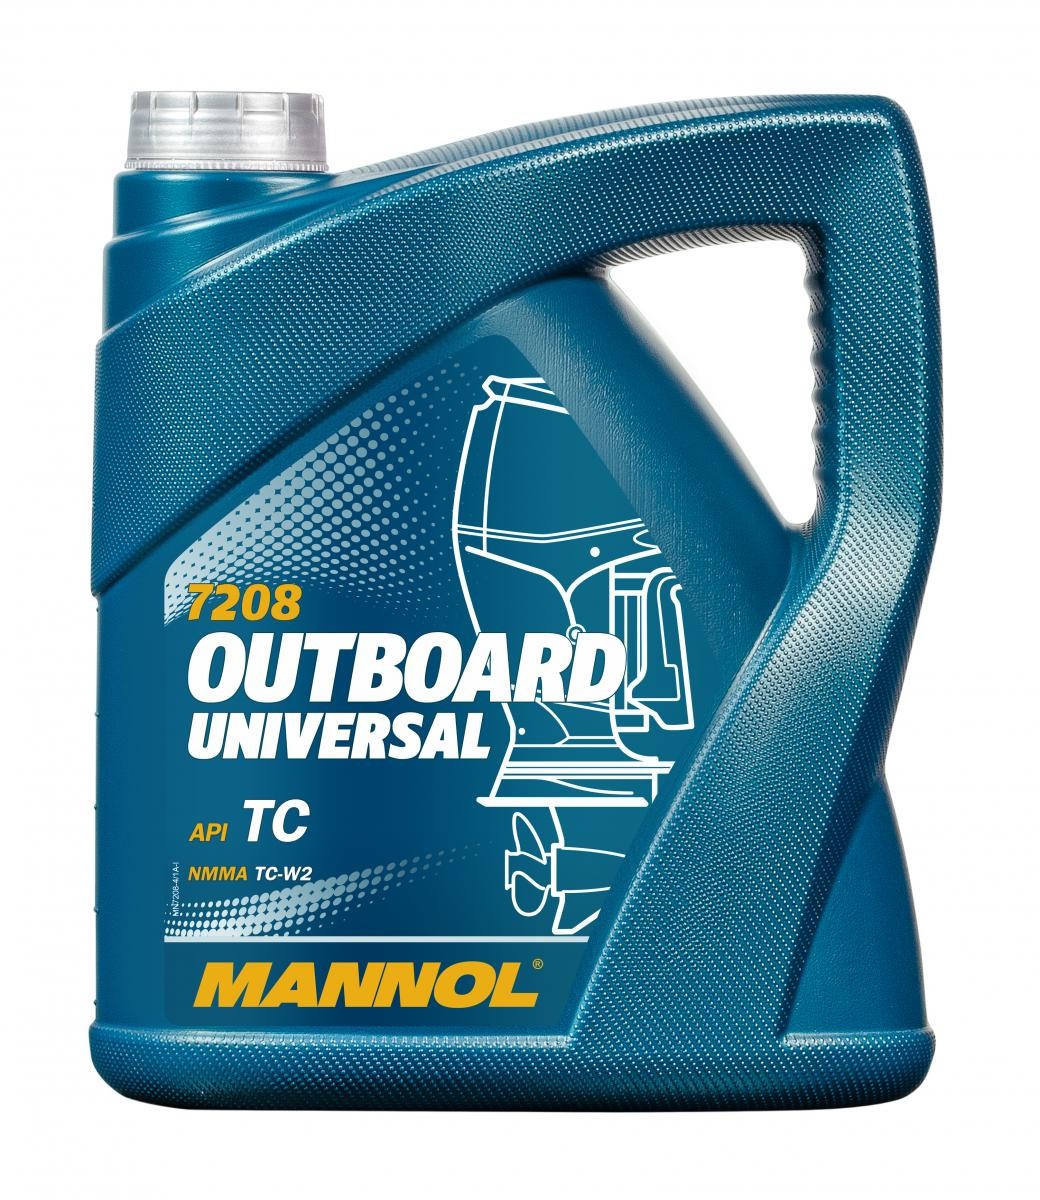 MANNOL Outboard, Universal MN7208-4 Engine oil 4l, Mineral Oil